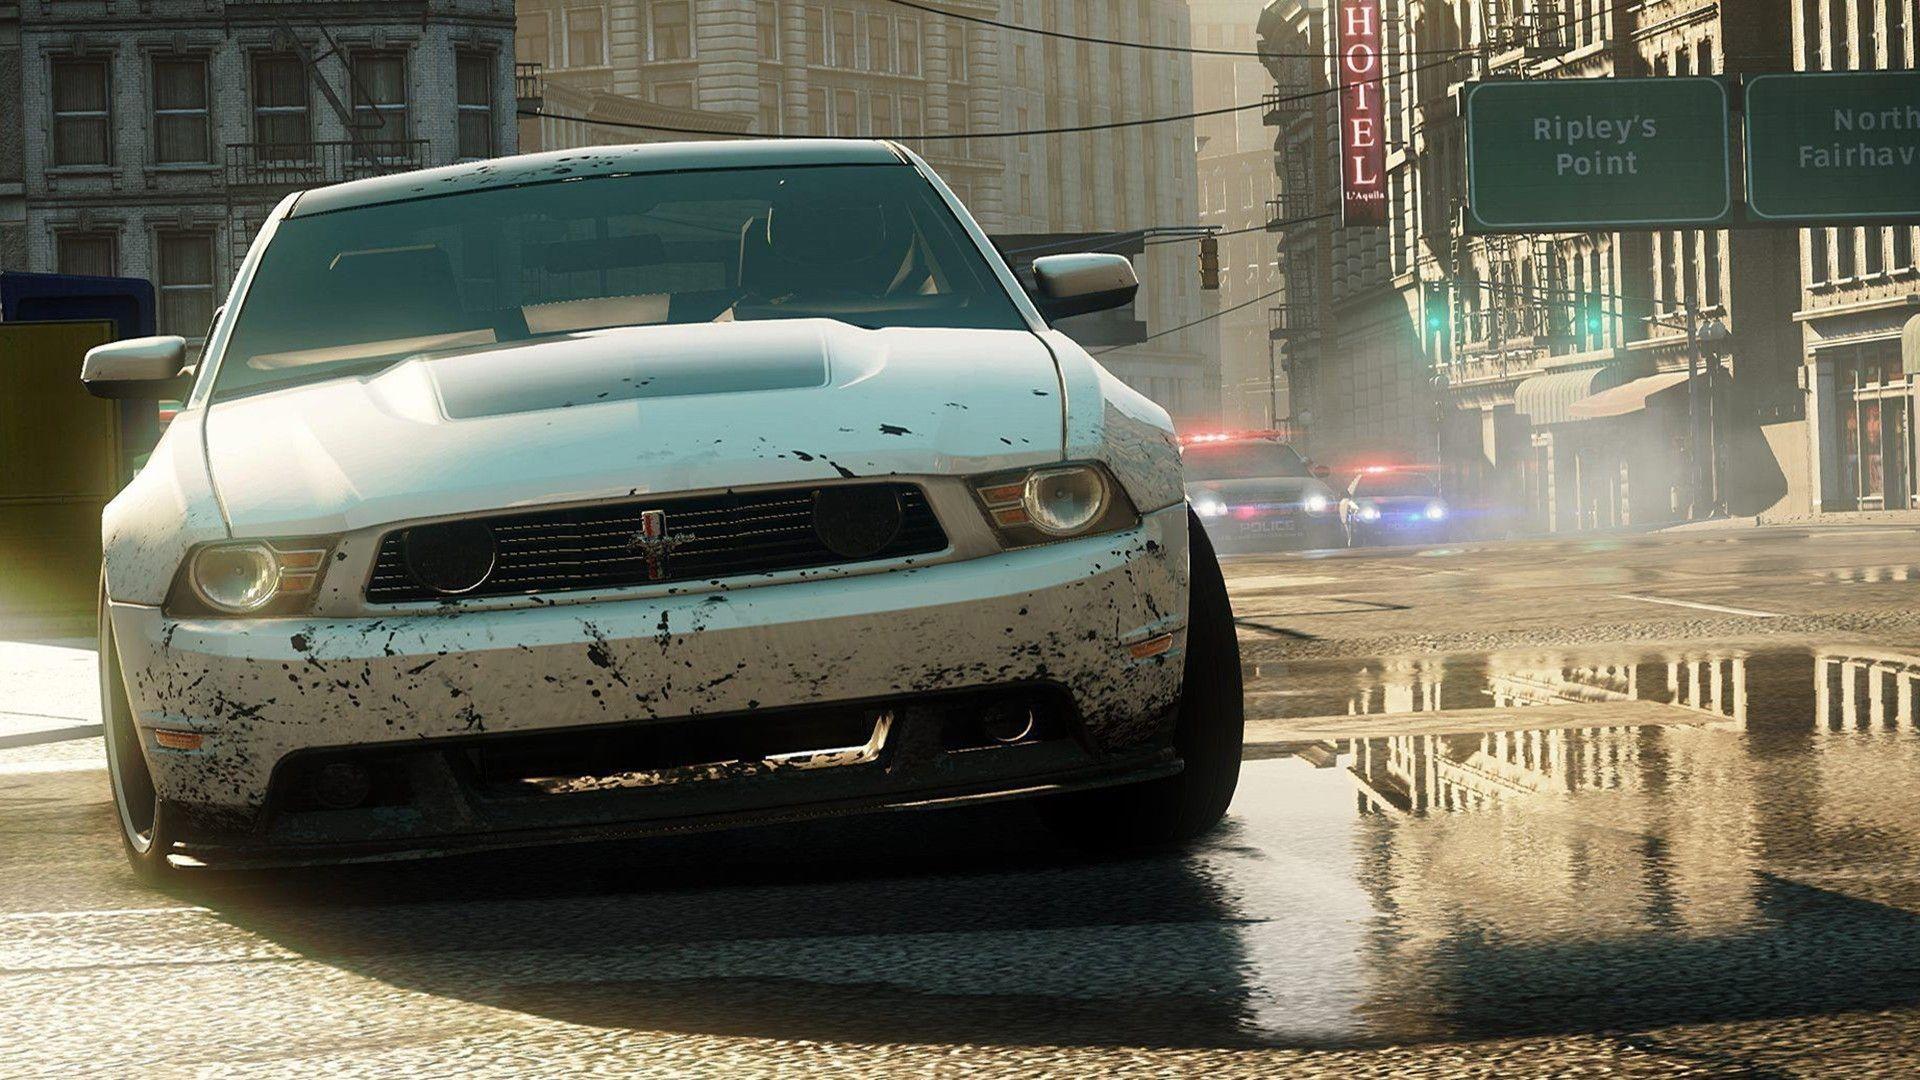 Need For Speed: Most Wanted (2012 Video Game), Need For Speed